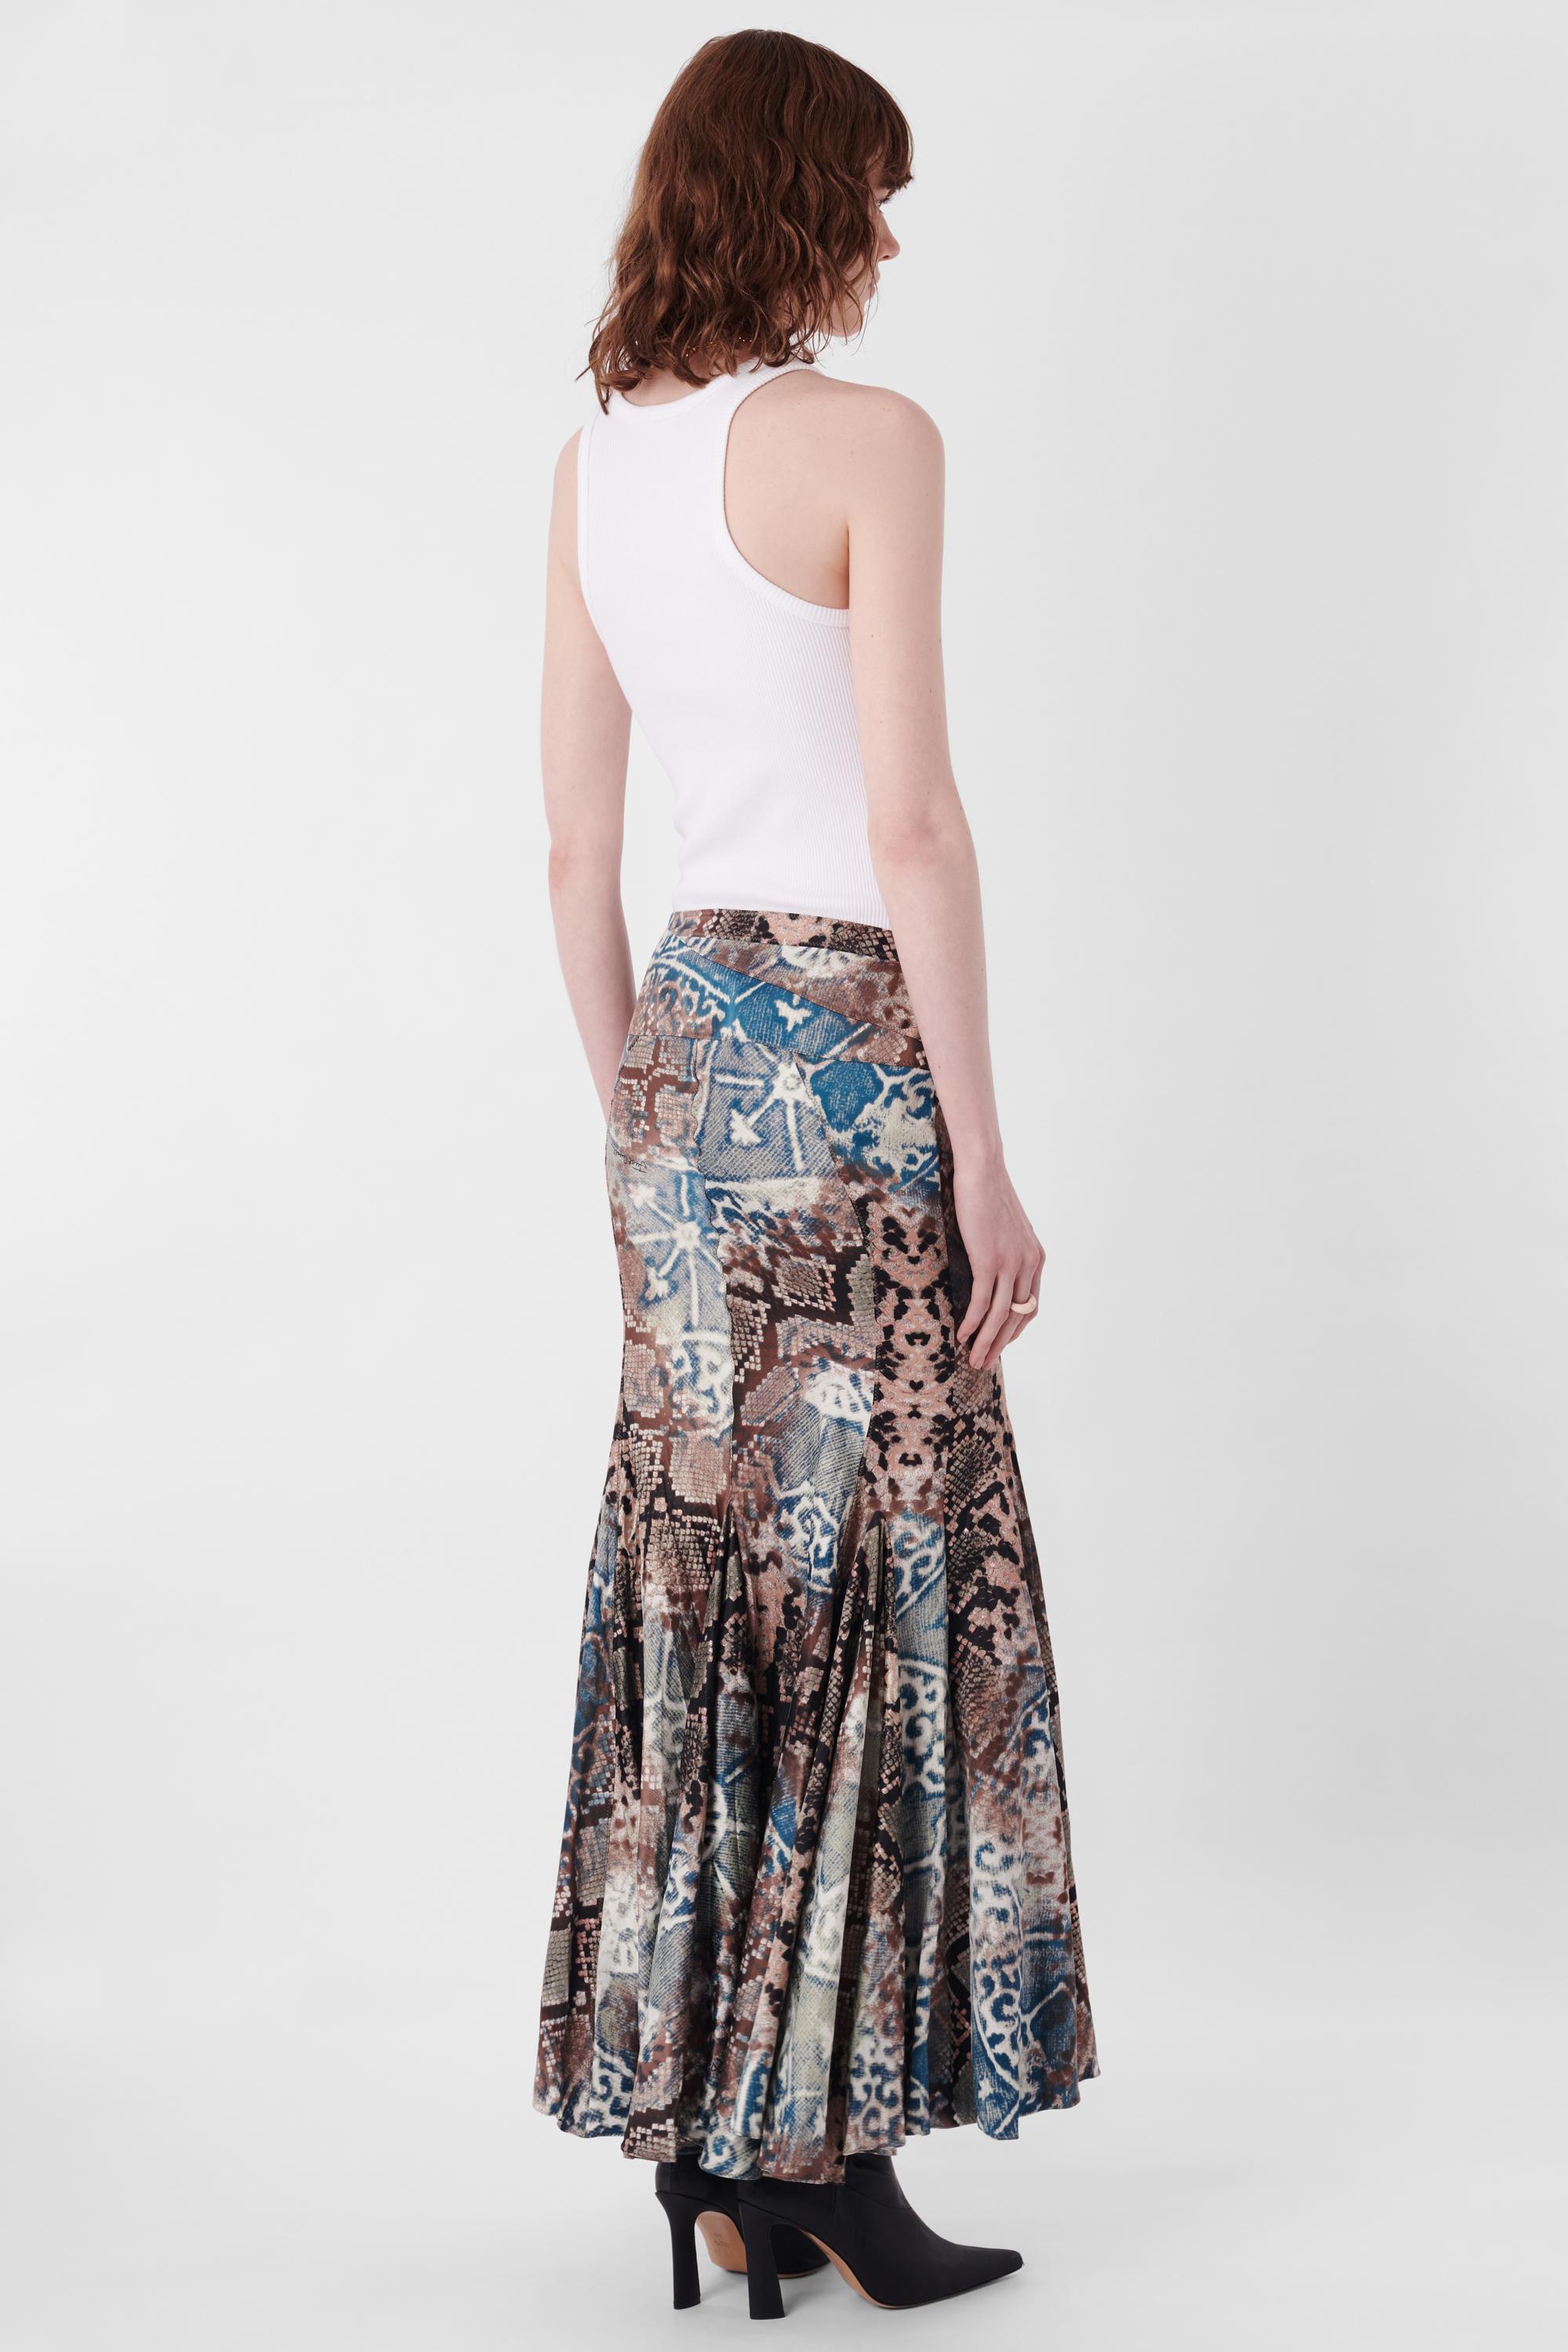 We are excited to present this Roberto Cavalli 2005 maxi skirt. Features fishtail silhouette, maxi length, contrasting python print and seaming detail at the waistband. In excellent vintage condition. Authenticity Guaranteed.

Label Size: 40